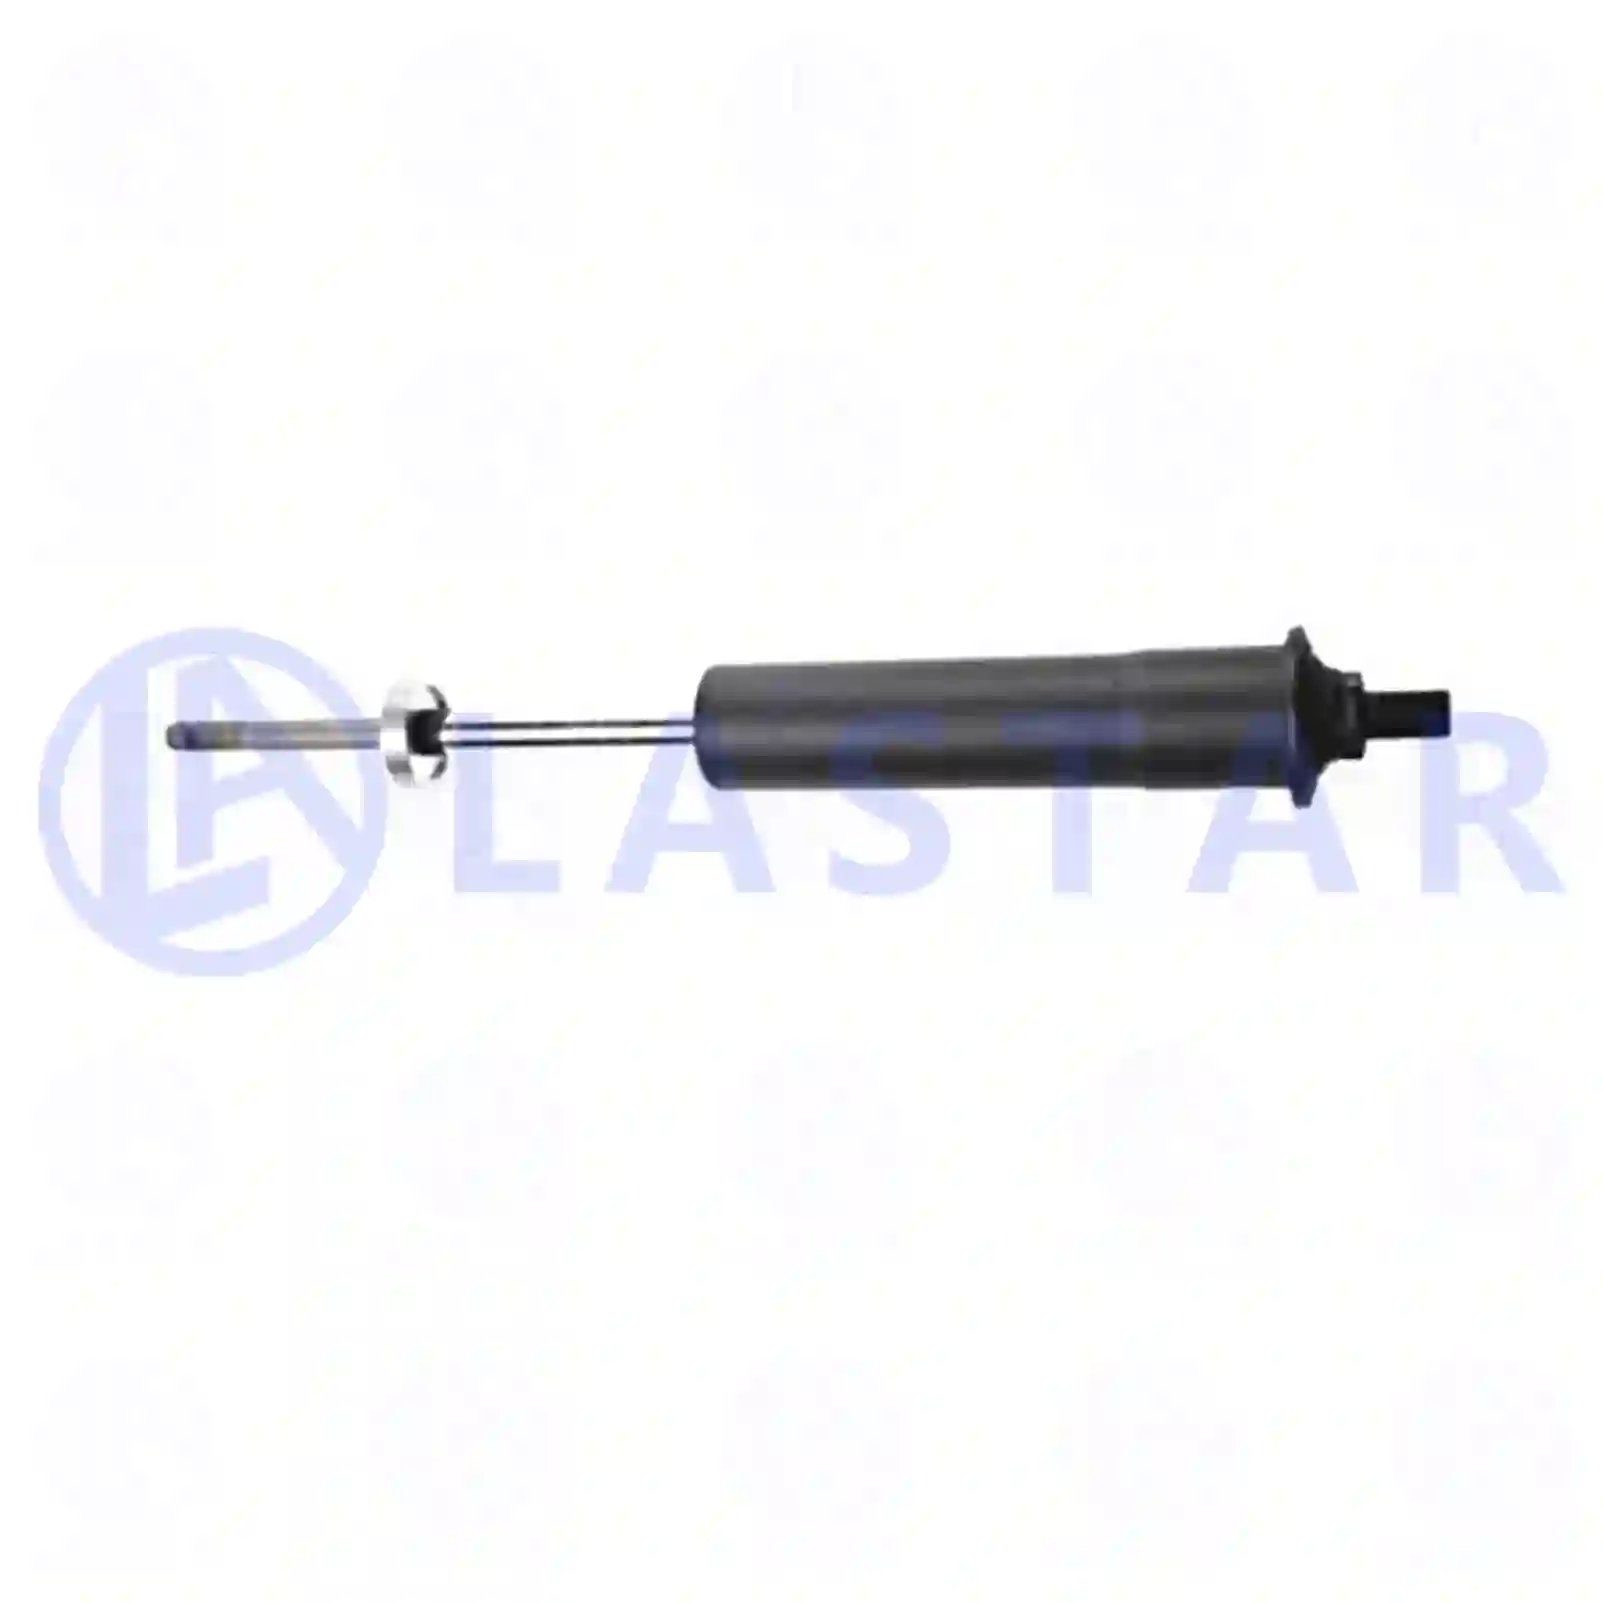 Cabin shock absorber, 77736031, 1397386, 1431747, , , ||  77736031 Lastar Spare Part | Truck Spare Parts, Auotomotive Spare Parts Cabin shock absorber, 77736031, 1397386, 1431747, , , ||  77736031 Lastar Spare Part | Truck Spare Parts, Auotomotive Spare Parts